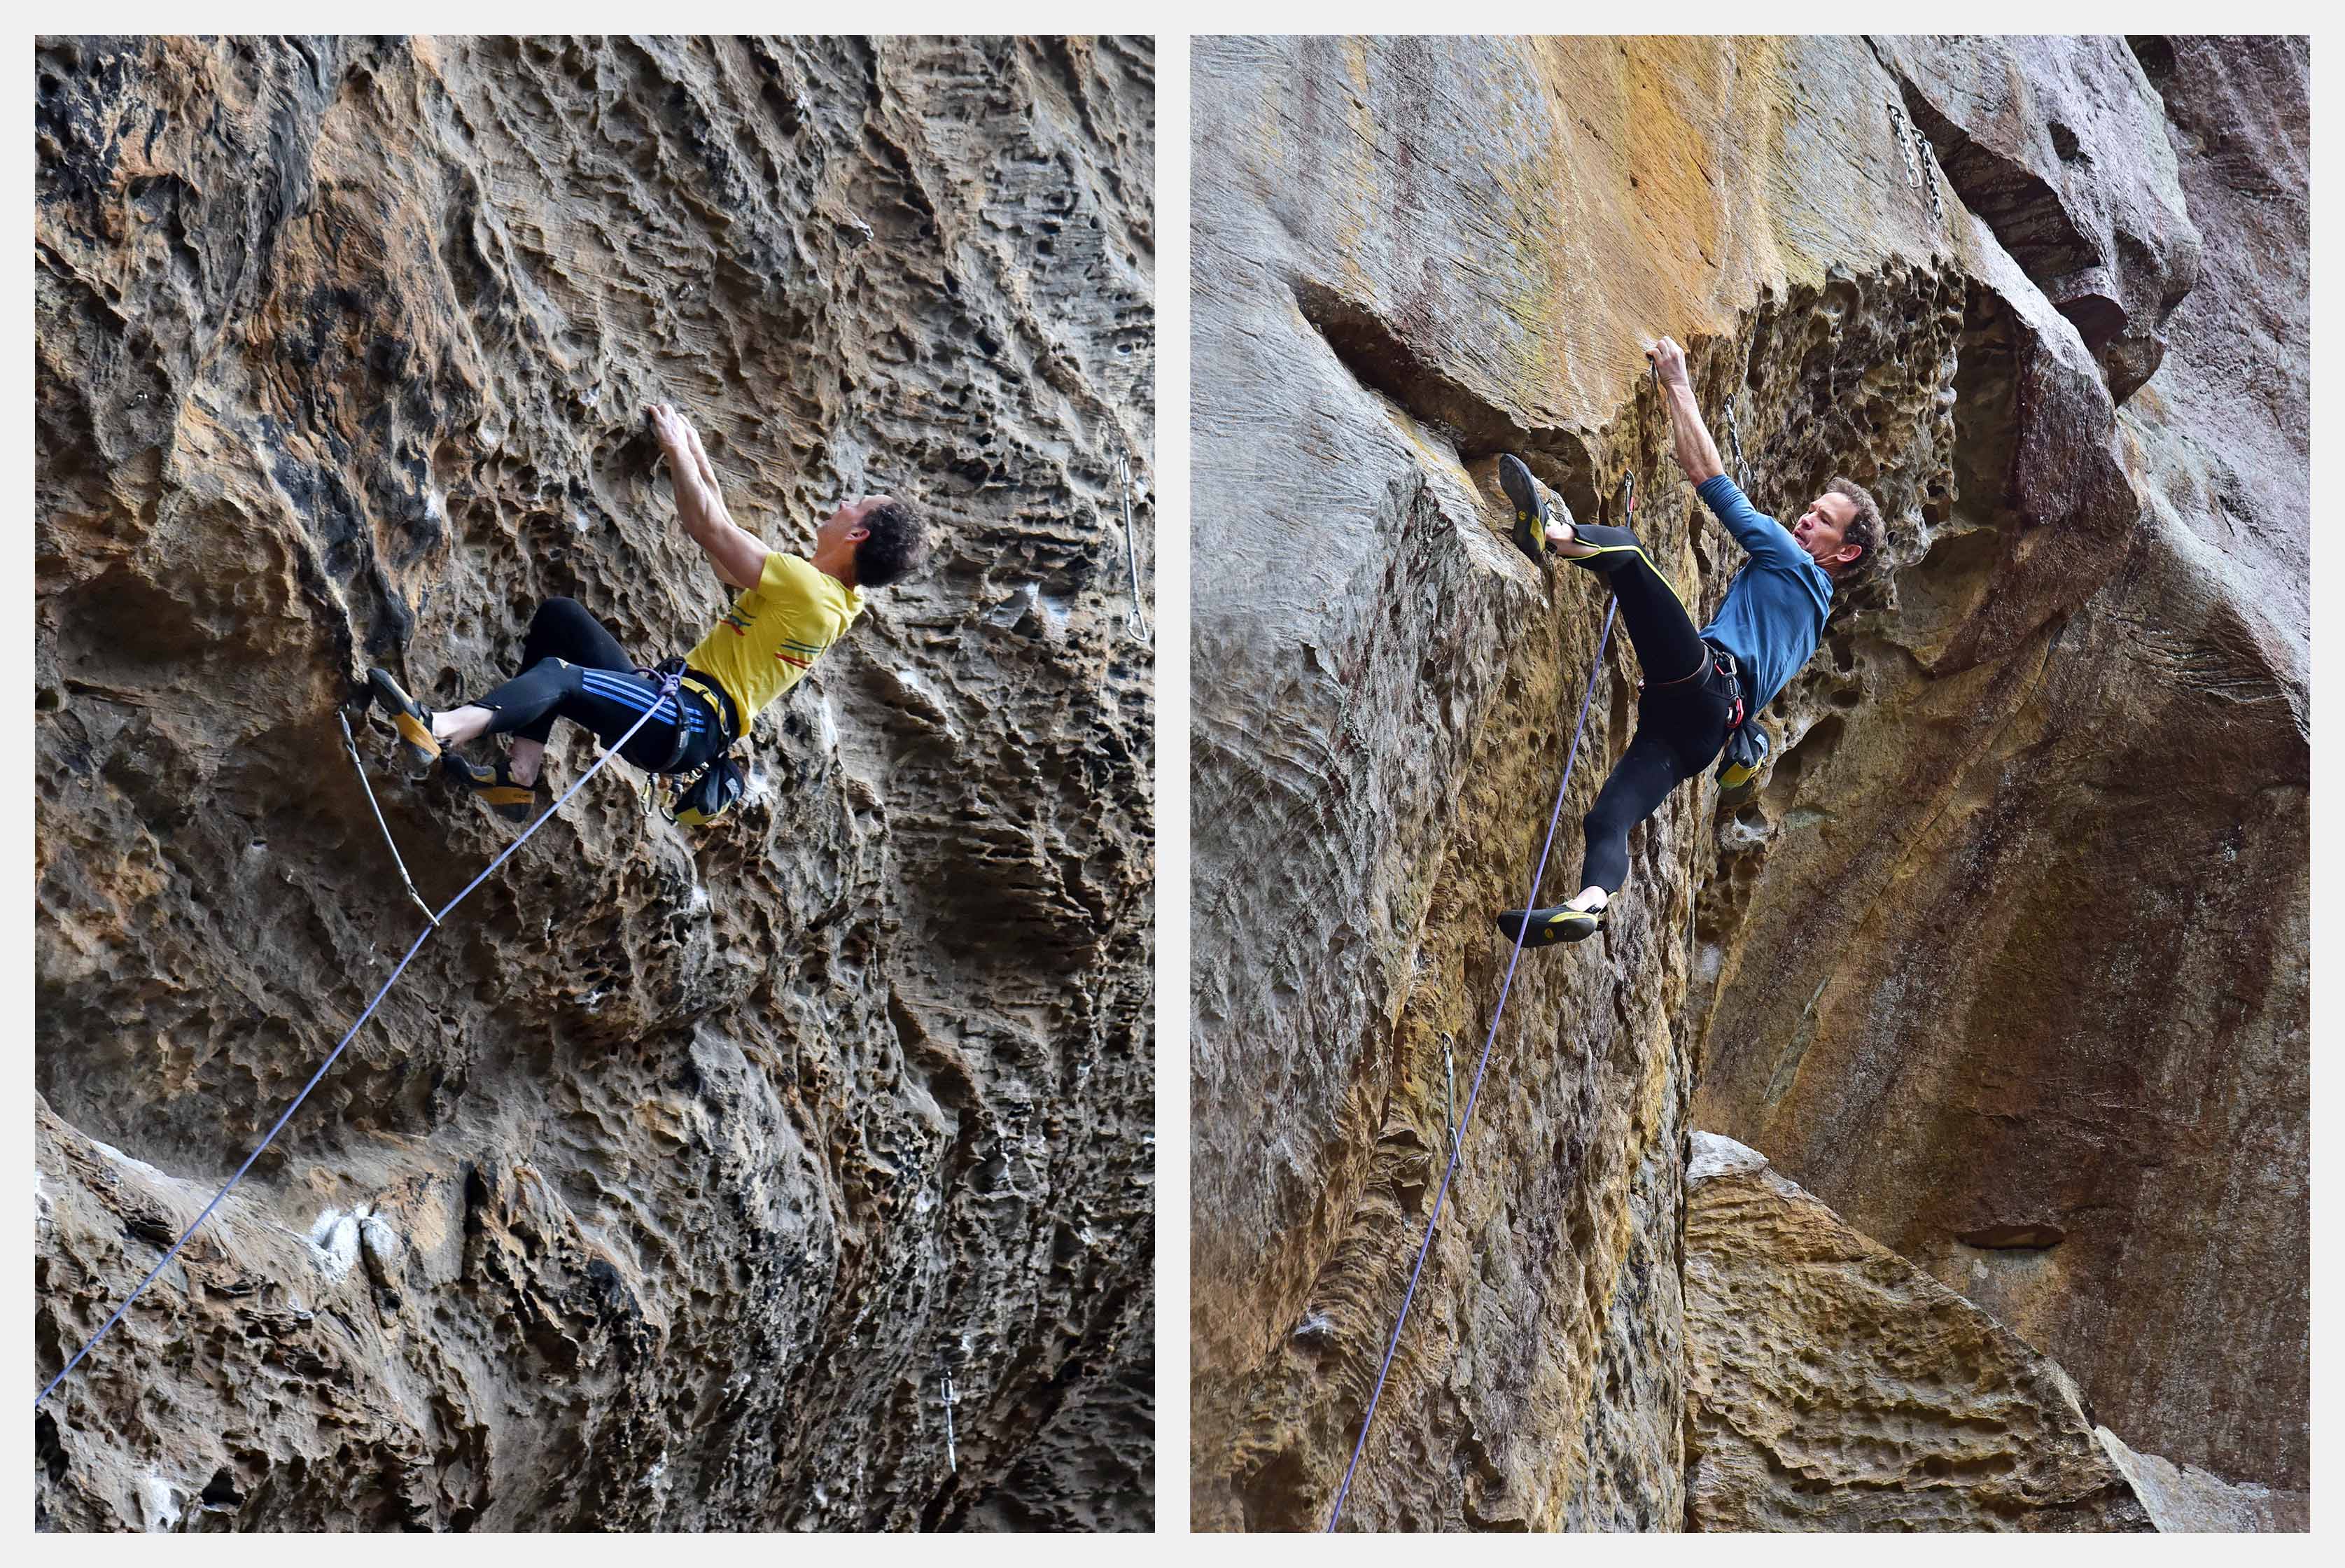 Eric (putting his power endurance to the test on Calm like a Bomb (5.13a), Red River Gorge (left) And on the bouldery Molten (5.13d), Red River Gorge (right). Photos: Eric Hörst collection